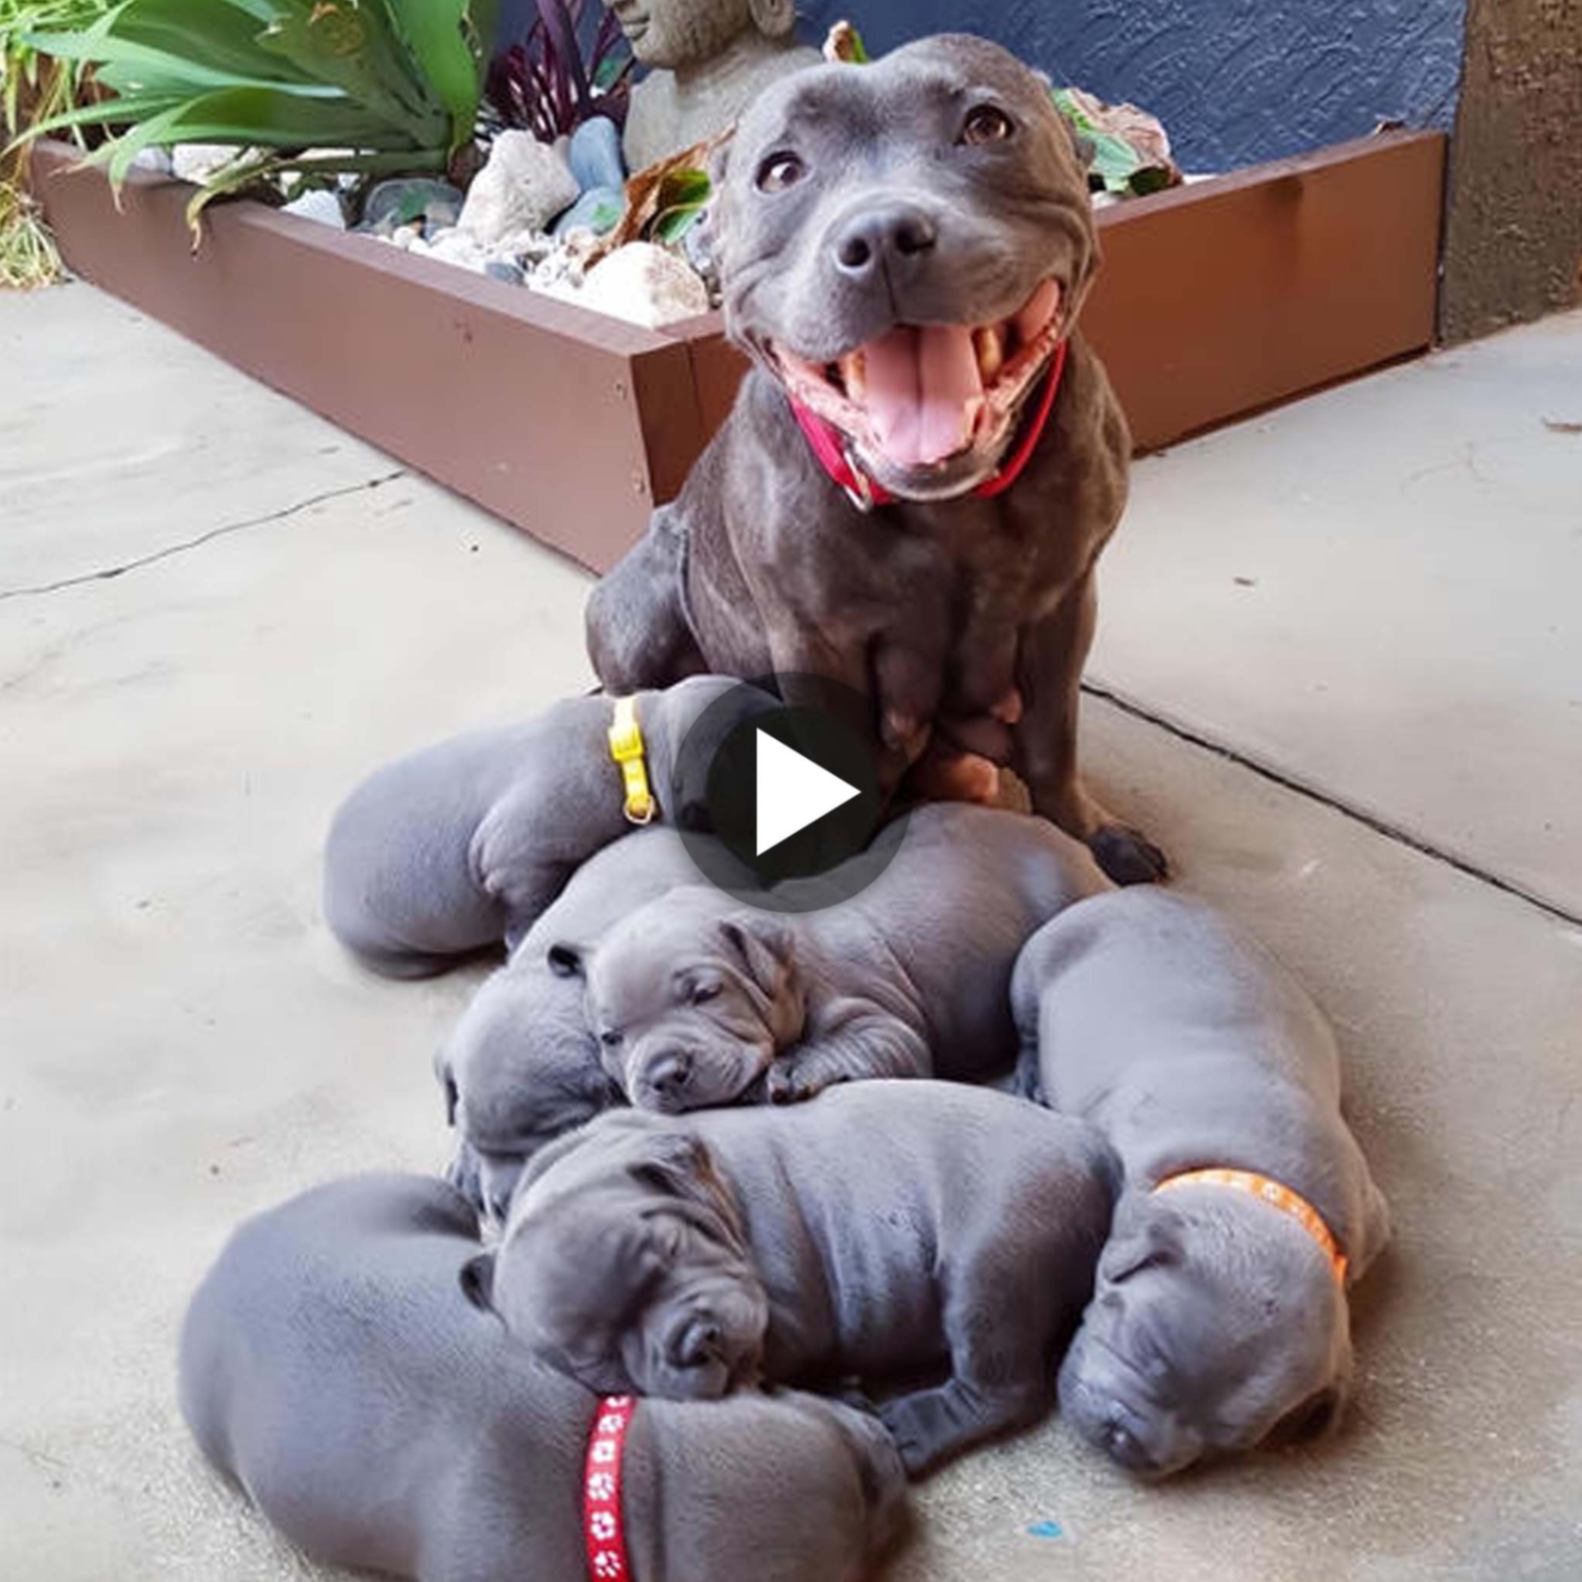 “The Joyful Grin of a Proud Dog Welcoming 6 Adorable Puppies: A Mother’s Success, Bringing Happiness to Everyone Who Witnesses It.”